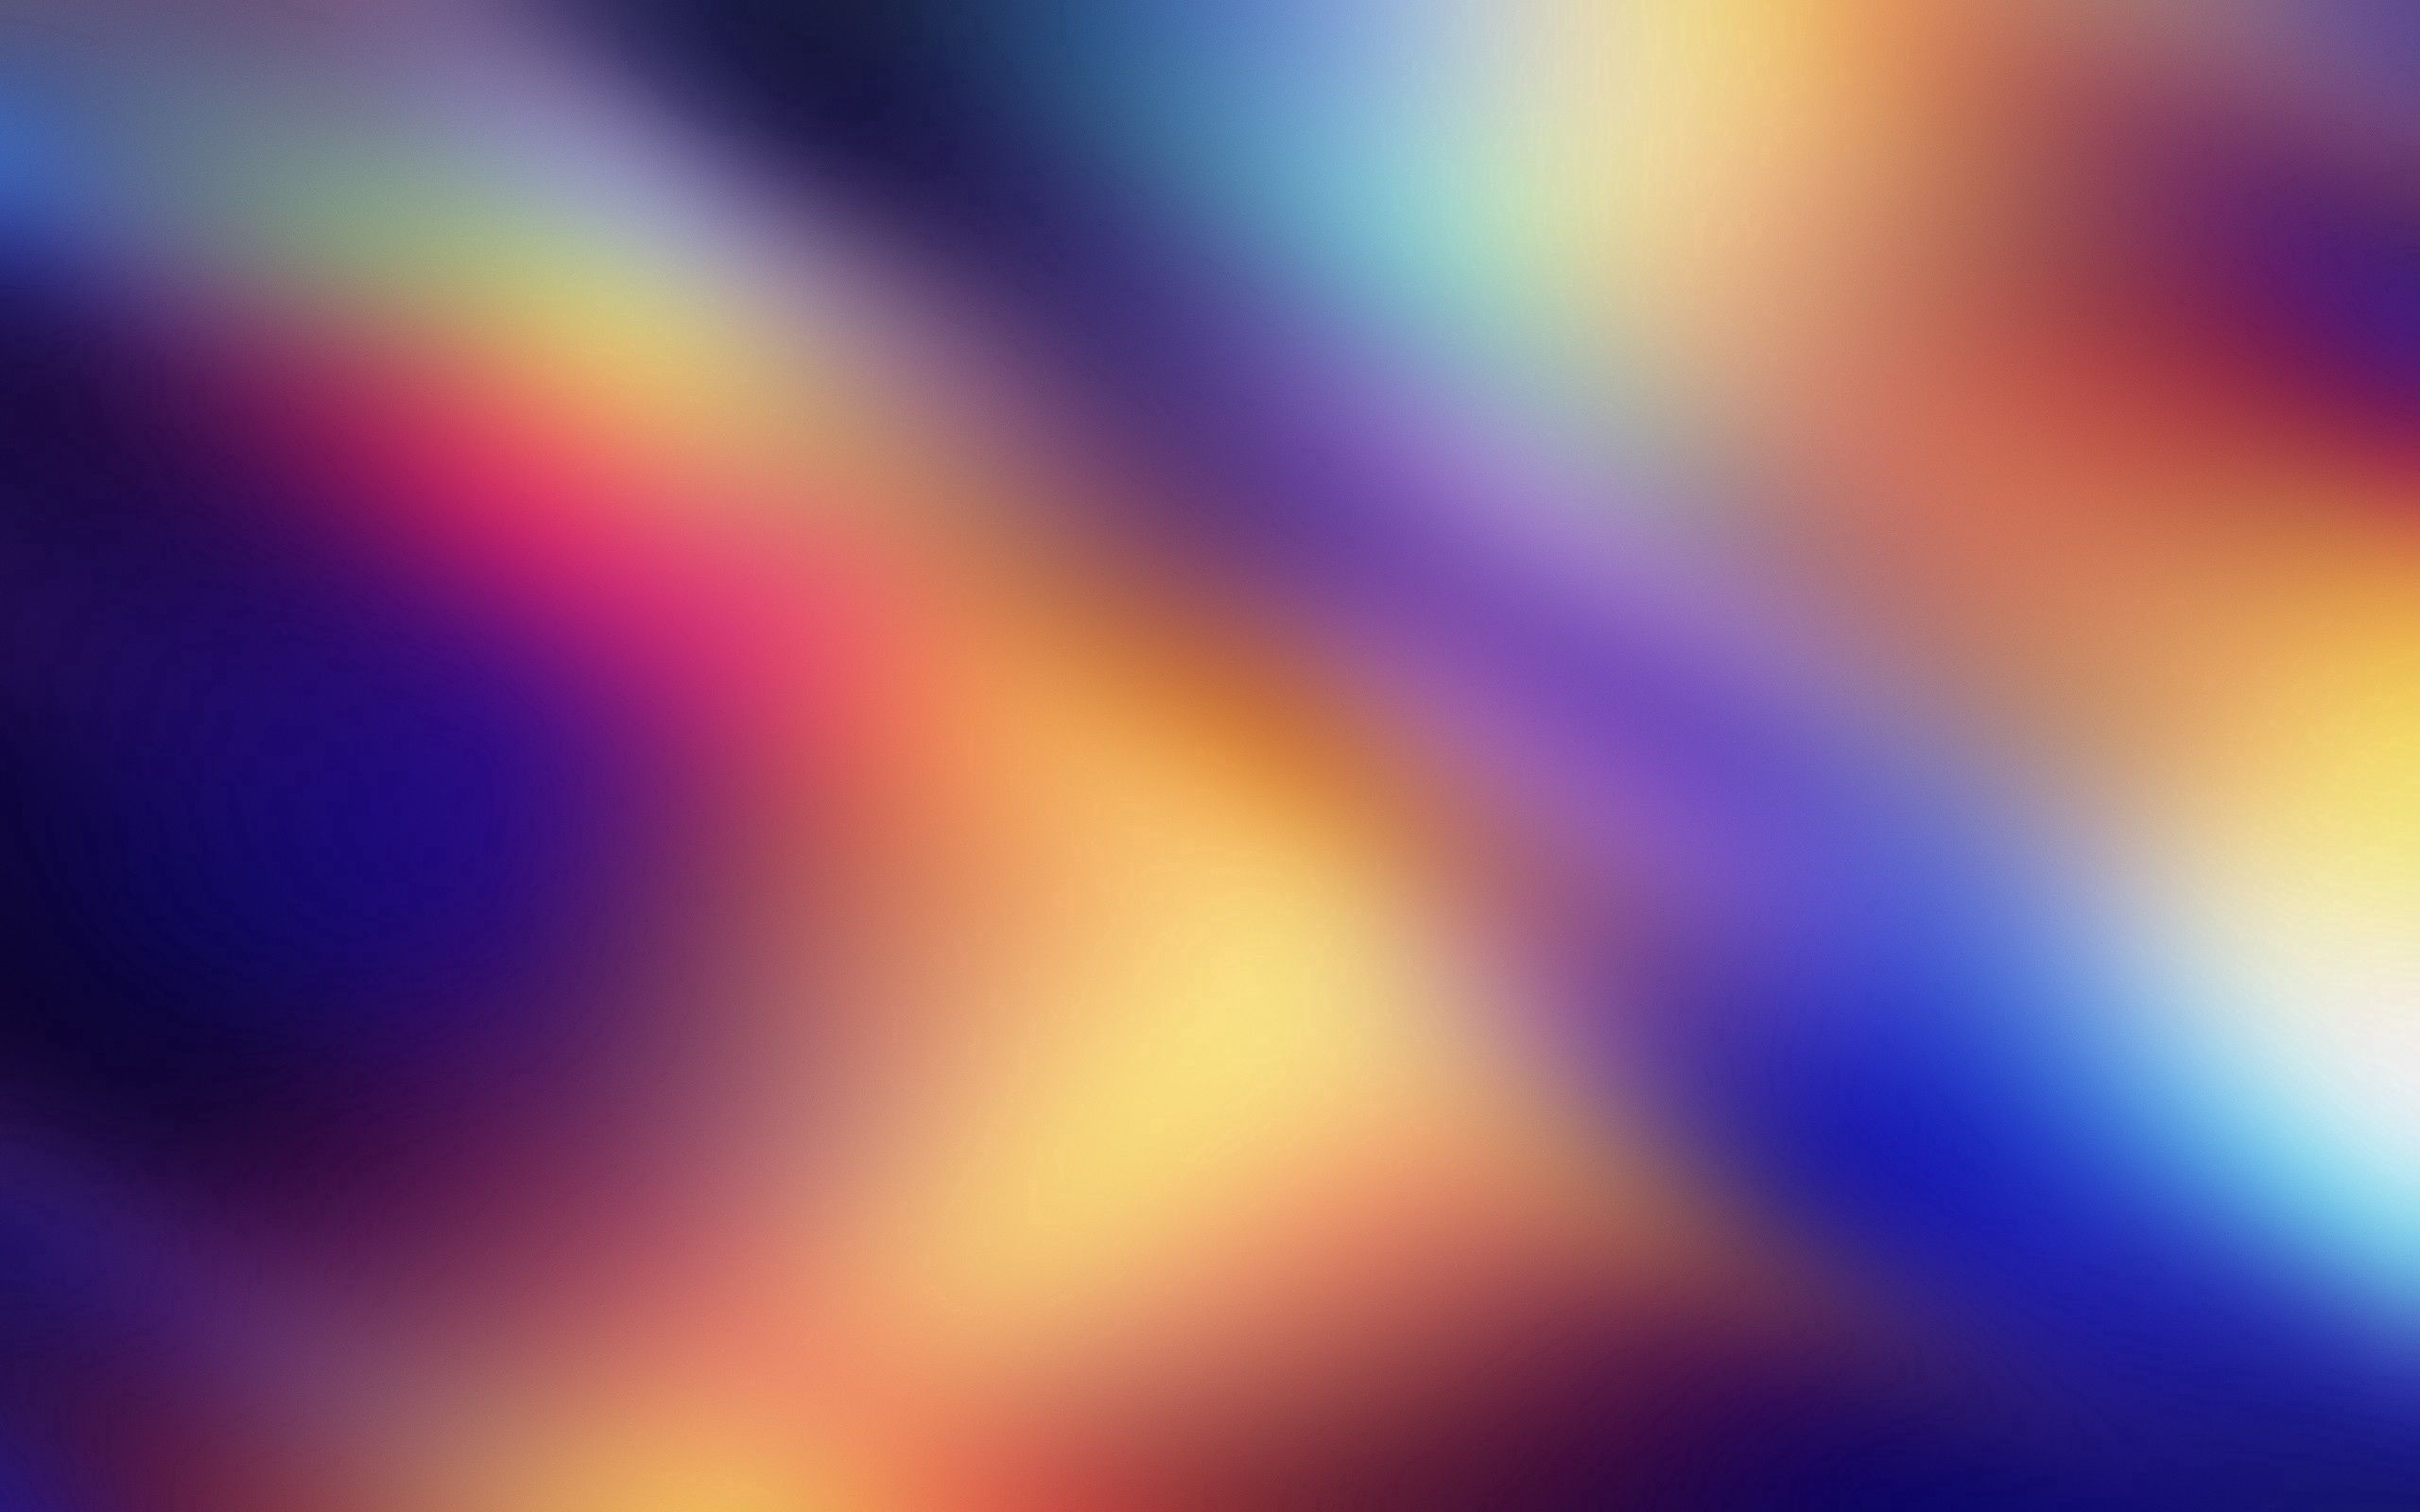 colorful, blurred, abstract, rainbow, colourful, iridescent, greased download HD wallpaper